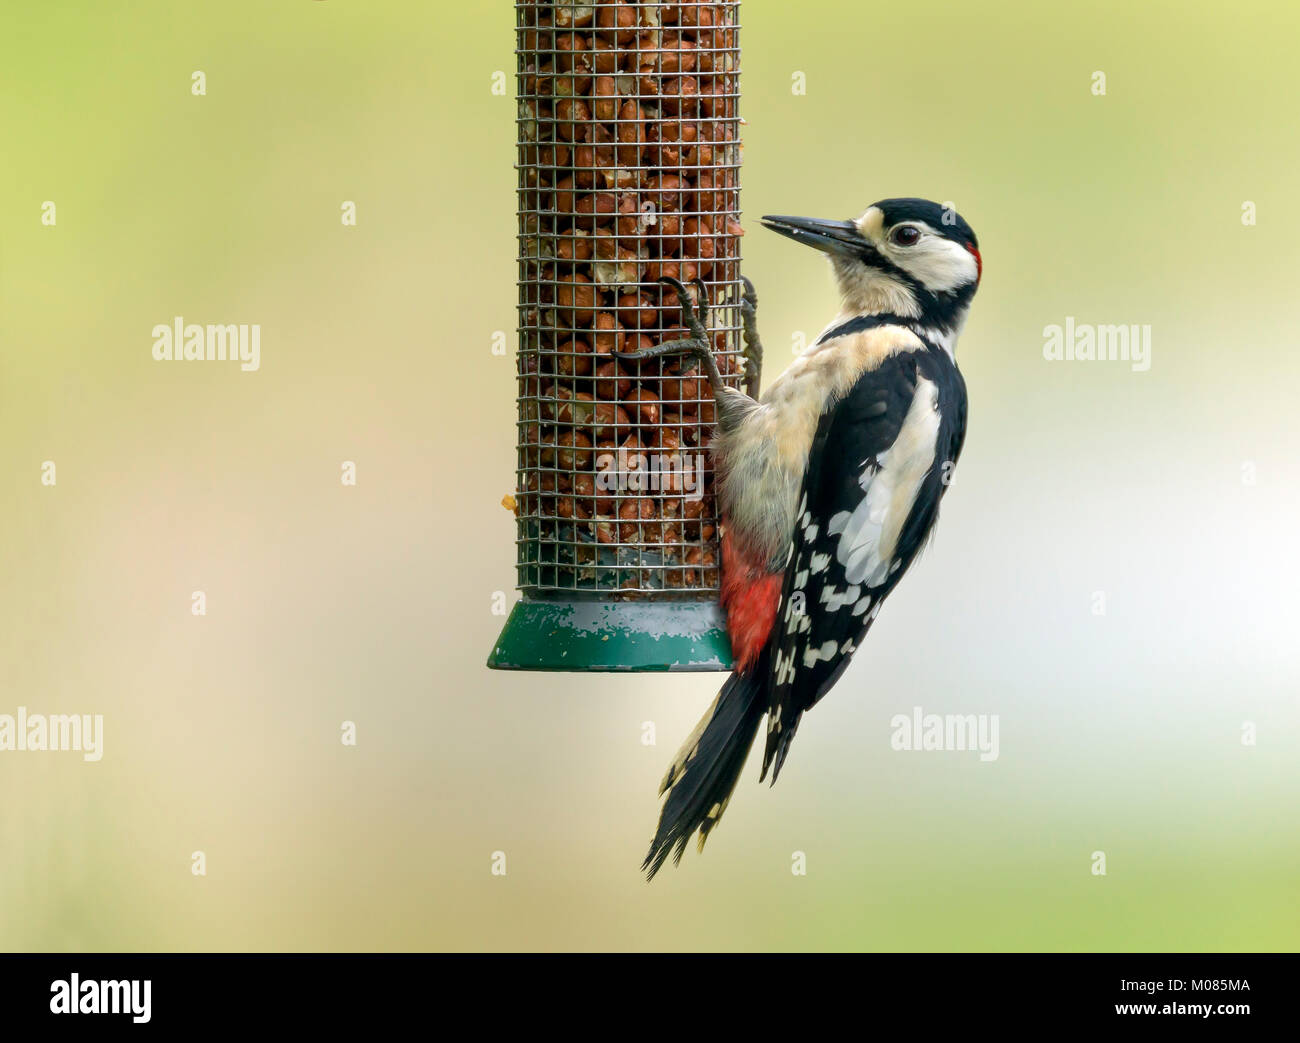 Male great spotted woodpecker, Dendrocopos major, on bird-feeder, Shropshire, England, UK, GB, Europe Stock Photo